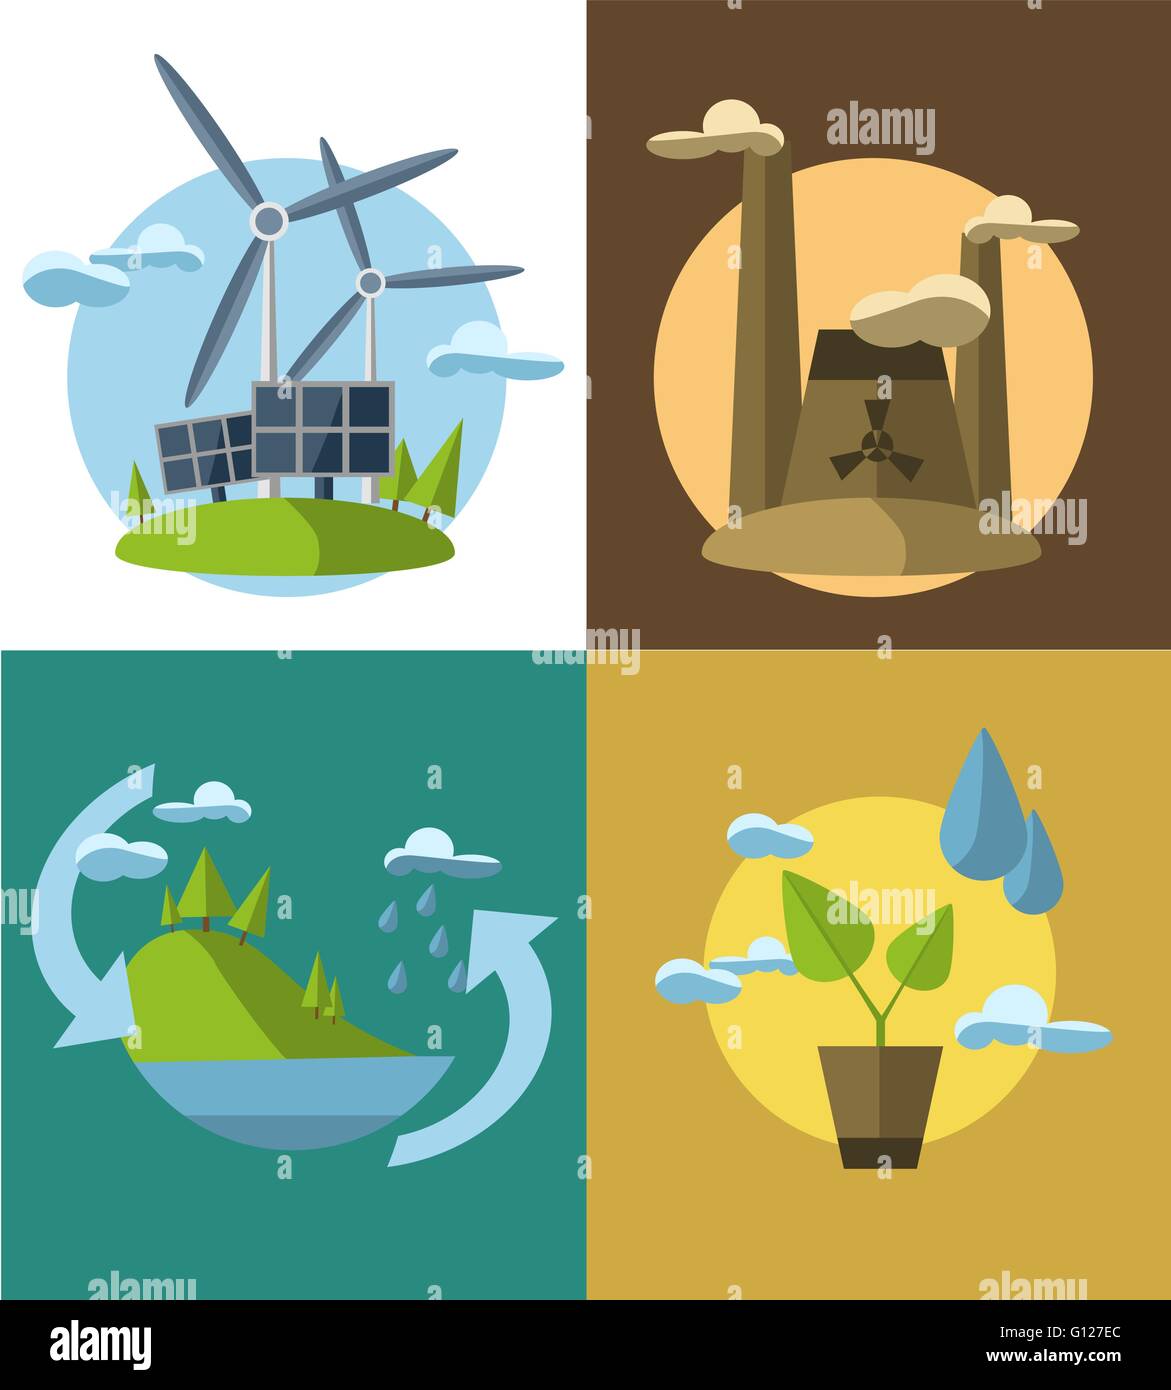 Set vector flat design concept illustrations with icons of ecology, environment, green energy and pollution Stock Vector